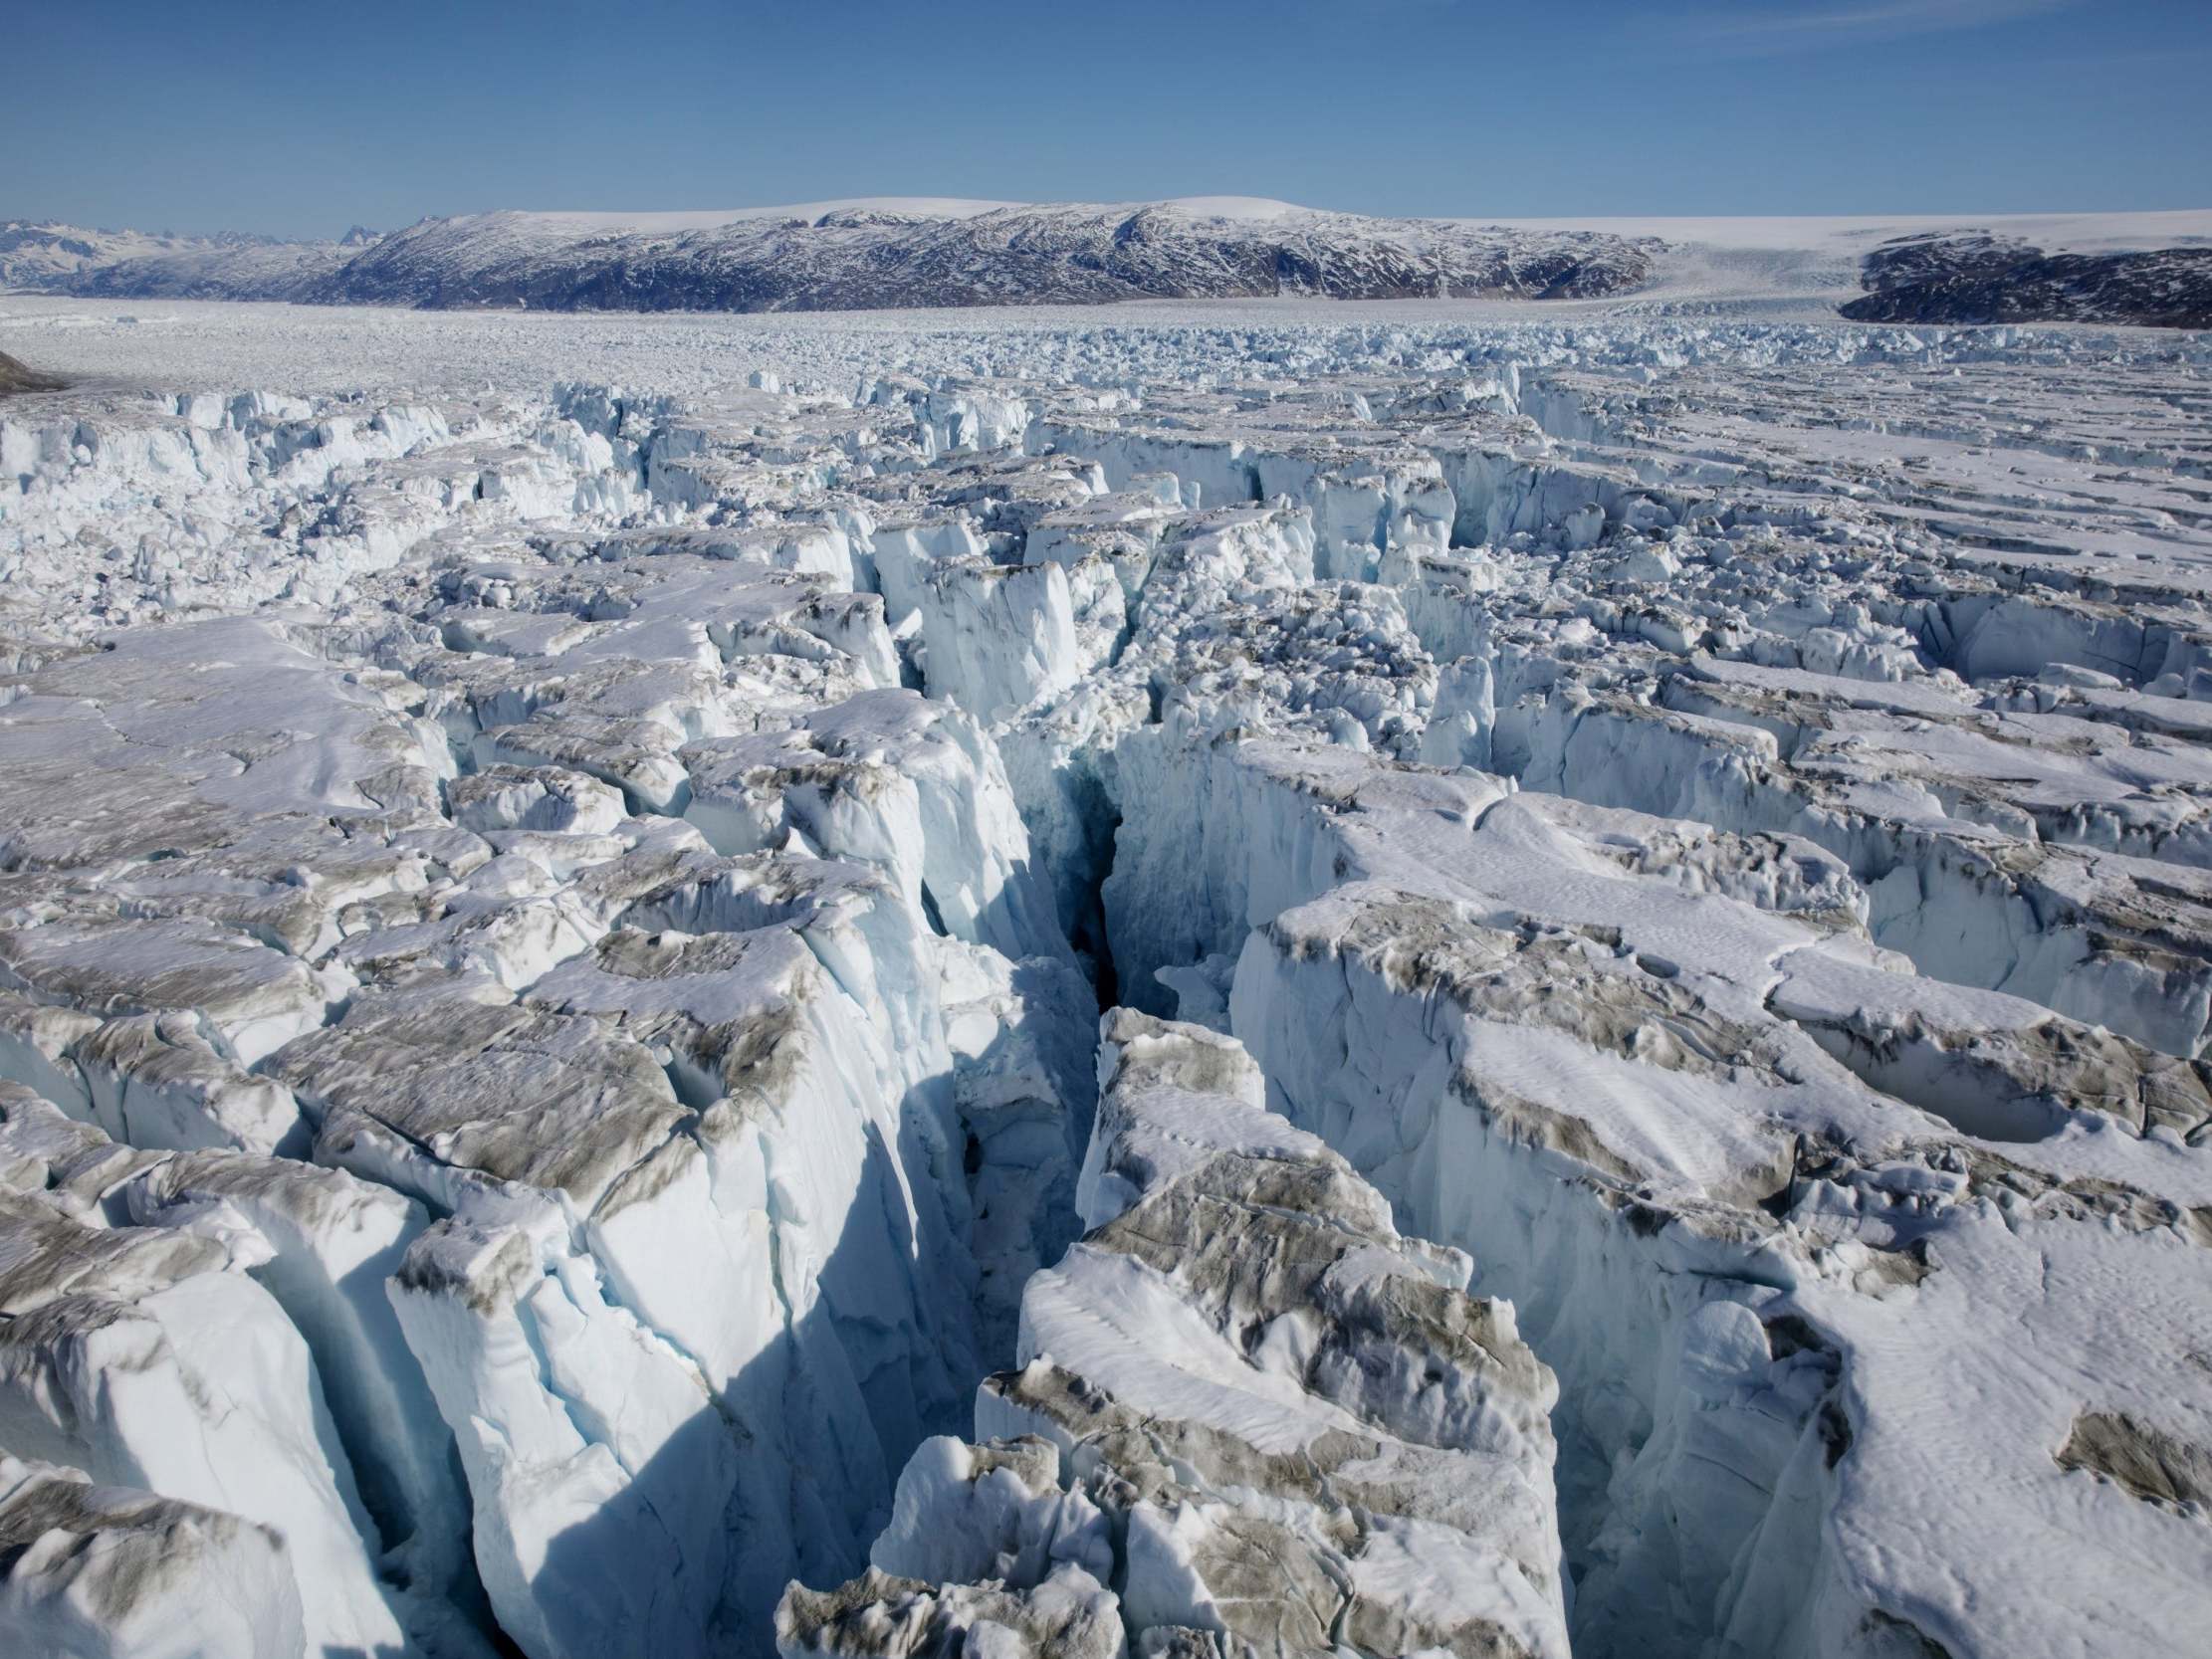 Greenland lost billions of tonnes of ice to global warming last year